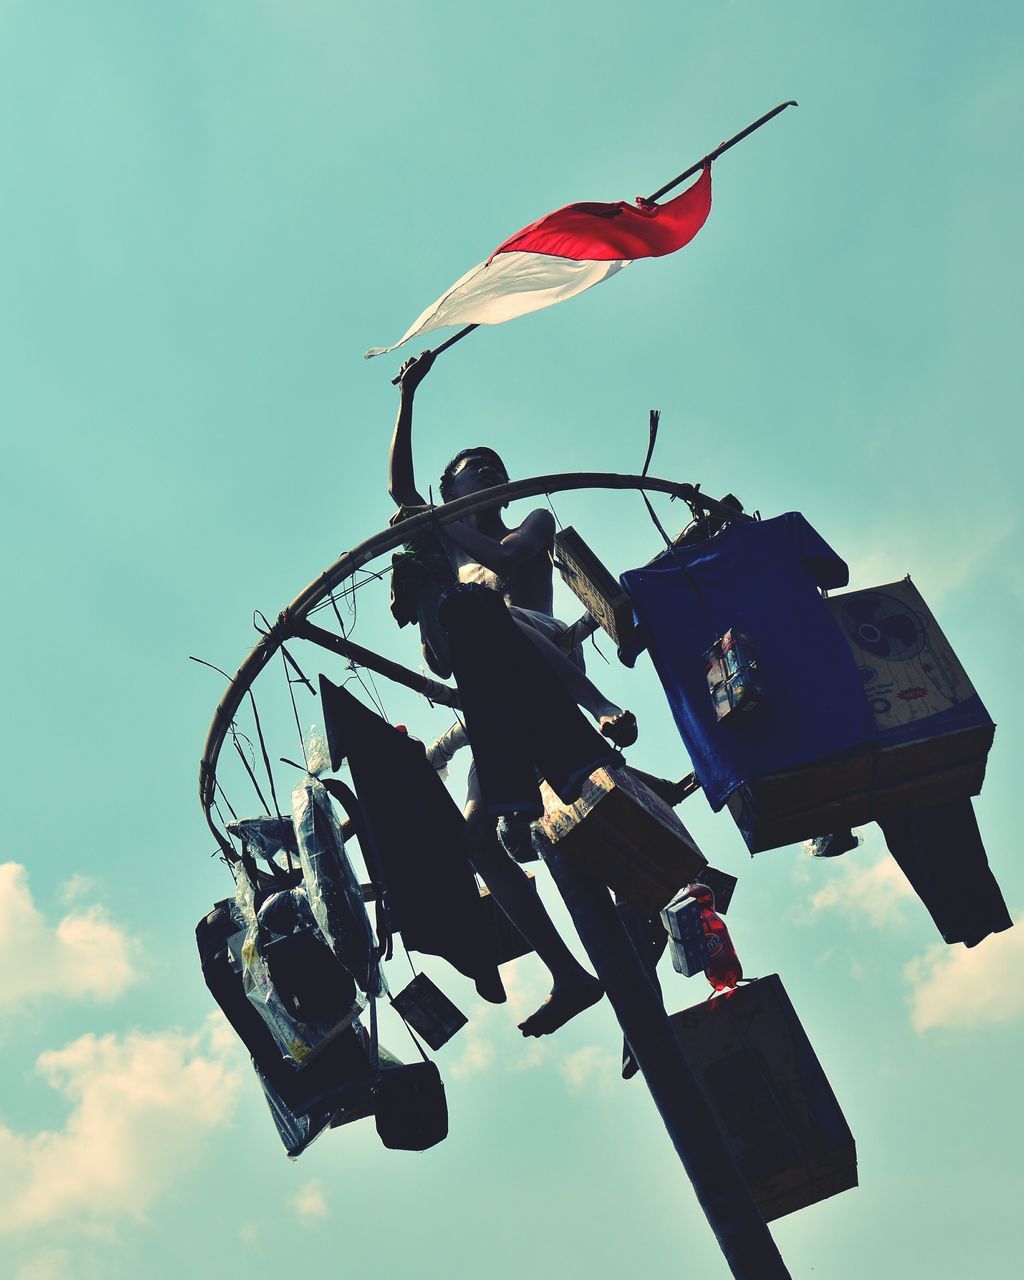 low angle view, sky, clear sky, blue, outdoors, day, hanging, metal, silhouette, arts culture and entertainment, no people, sunlight, machinery, technology, transportation, equipment, mode of transport, amusement park, old-fashioned, metallic